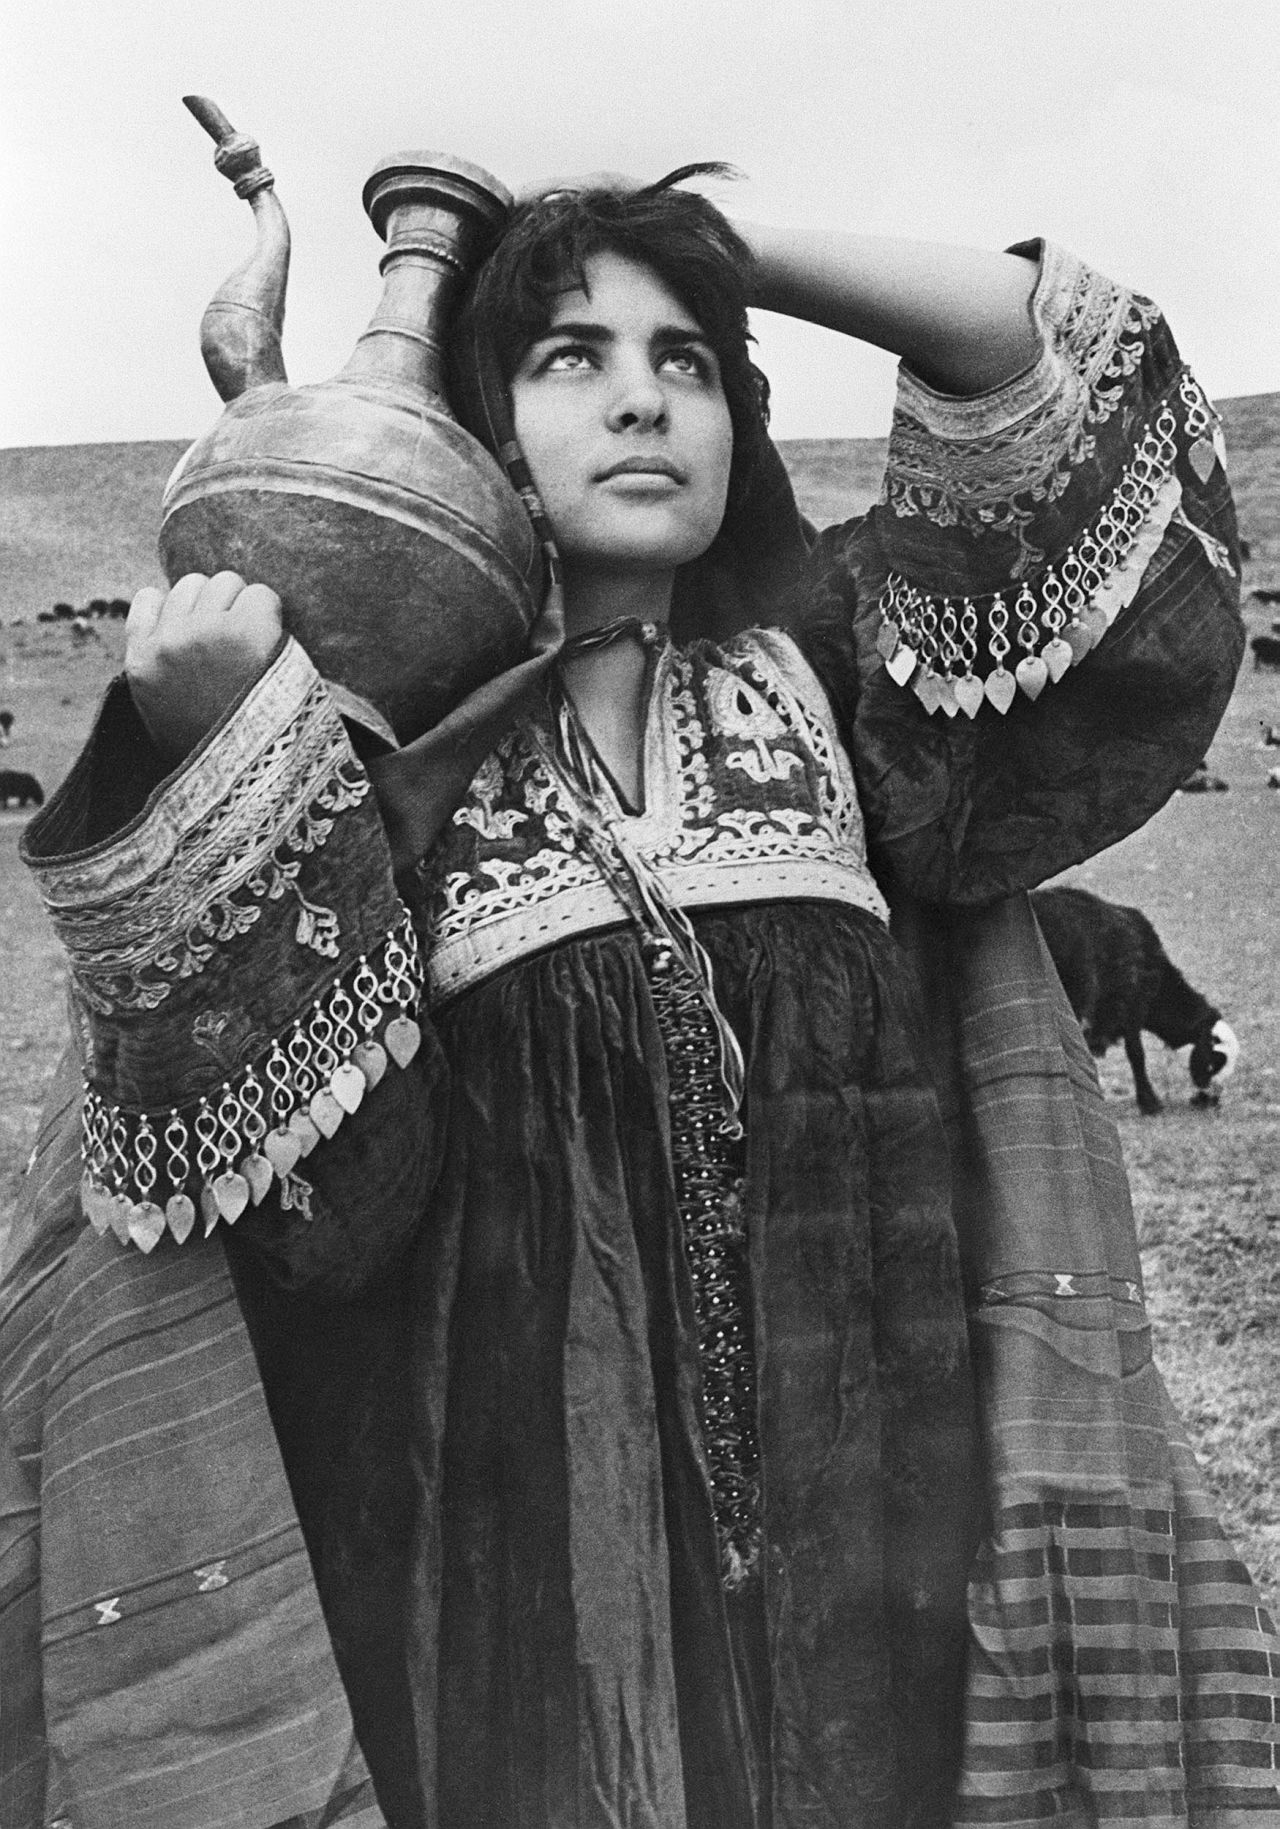 A nomad girl shows off her elaborate costume which is unique to women from the Afghan Pashtun ethnic group to which nomads also belong. The date when this photograph was taken is unknown.